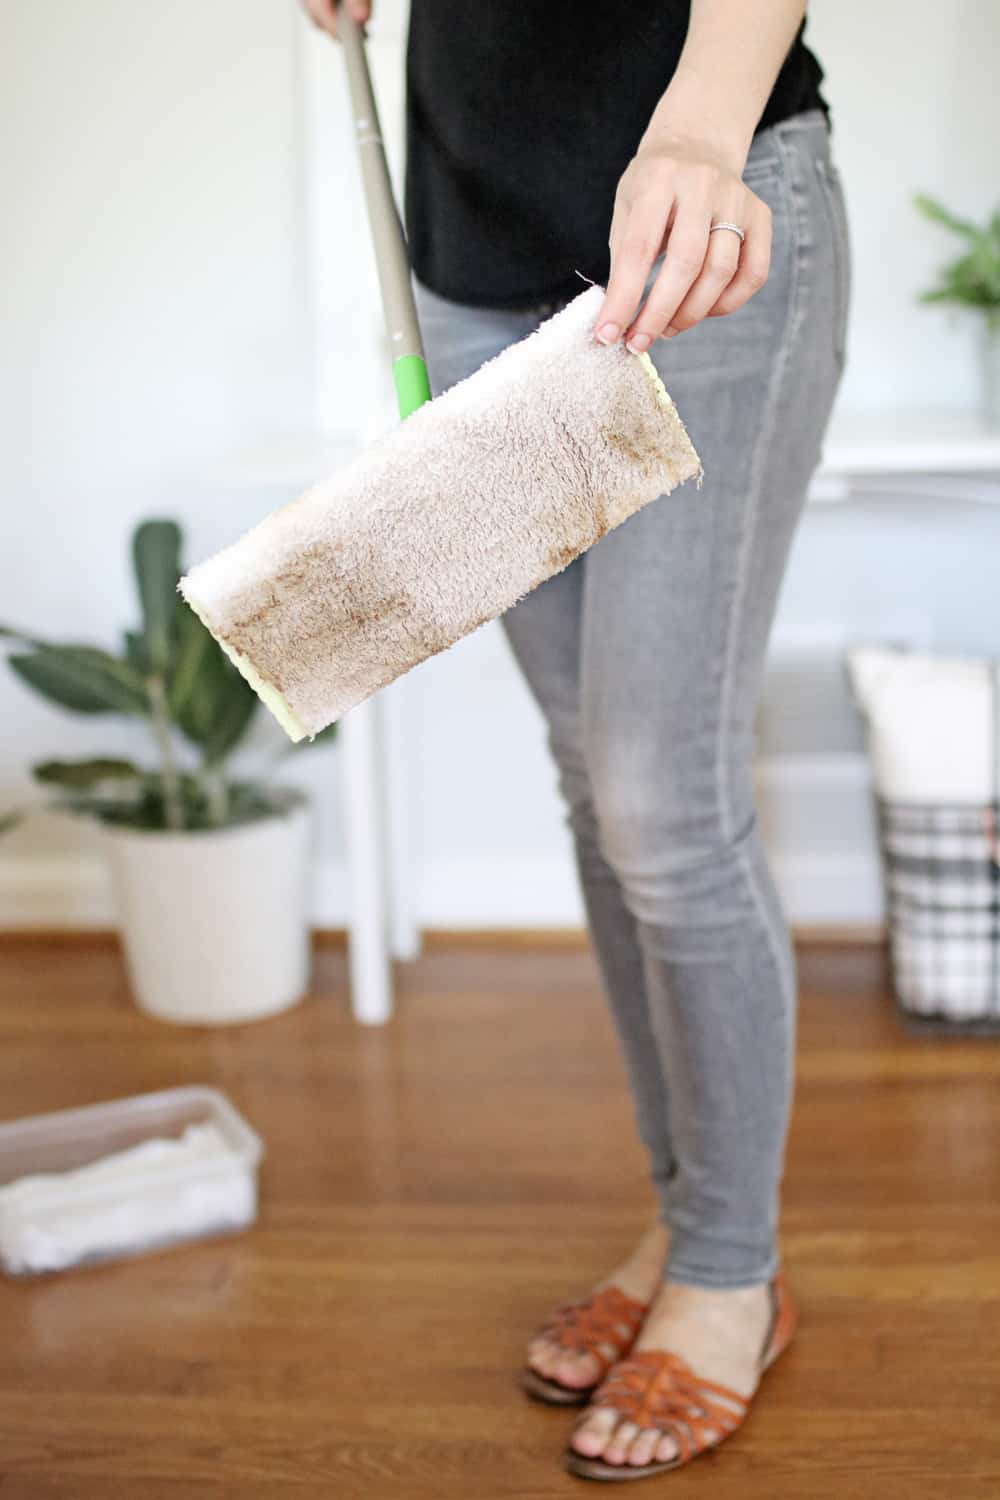 How to Make Your Own Swiffer Pads and Solution